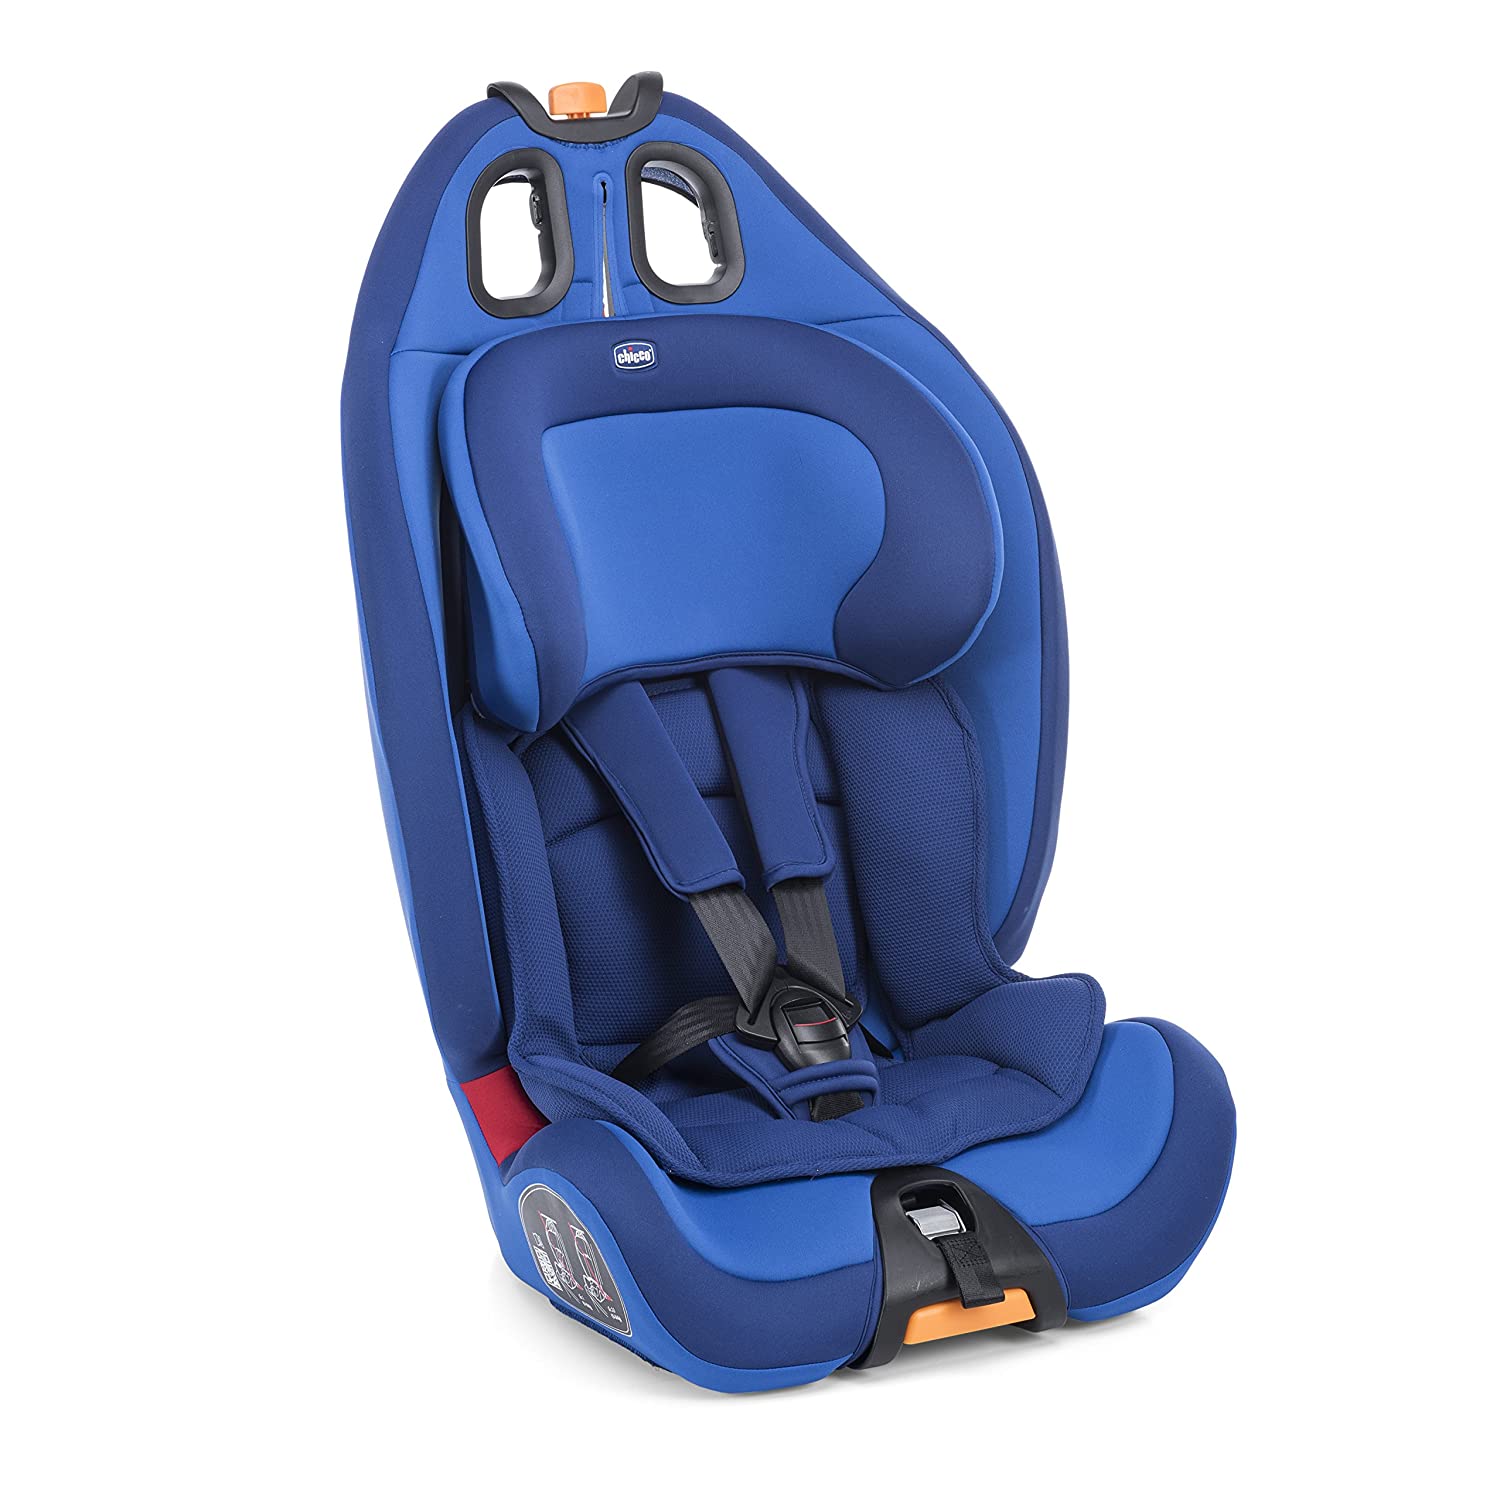 Chicco Gro-up Child Car Seat Size 1/2/3 Power Blue